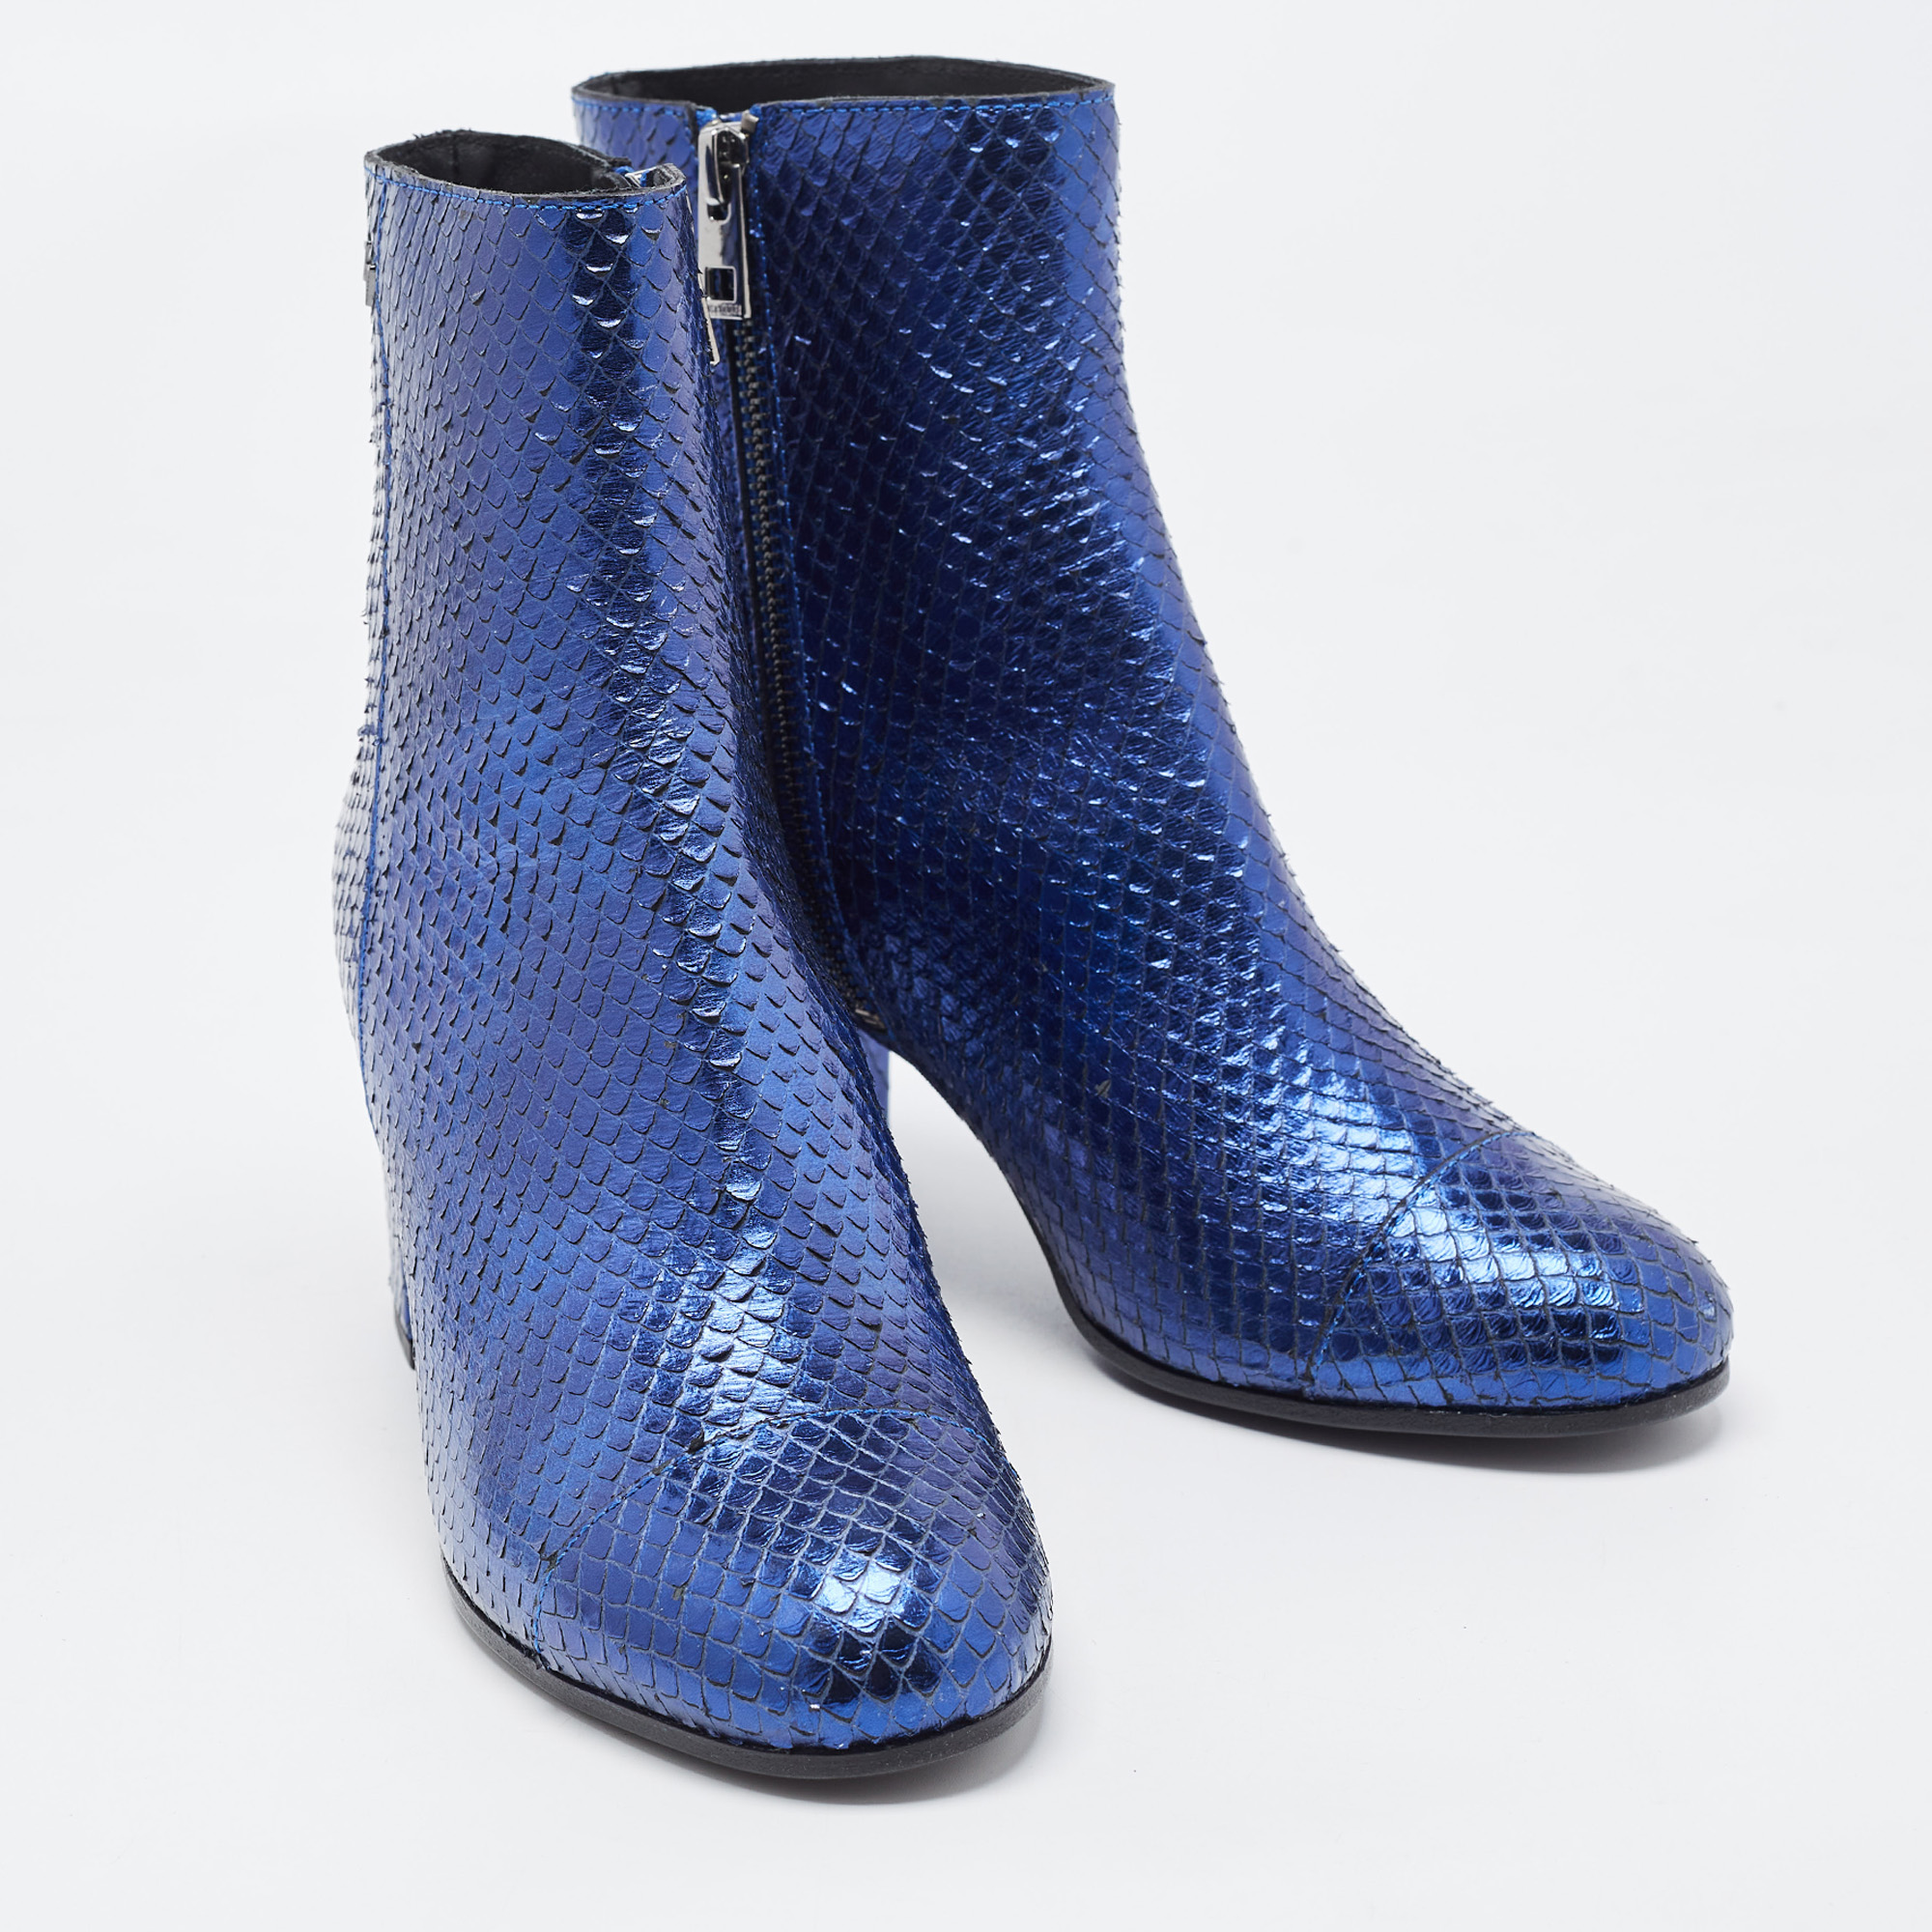 Zadig & Voltaire Blue Python Ankle Boots Size 36